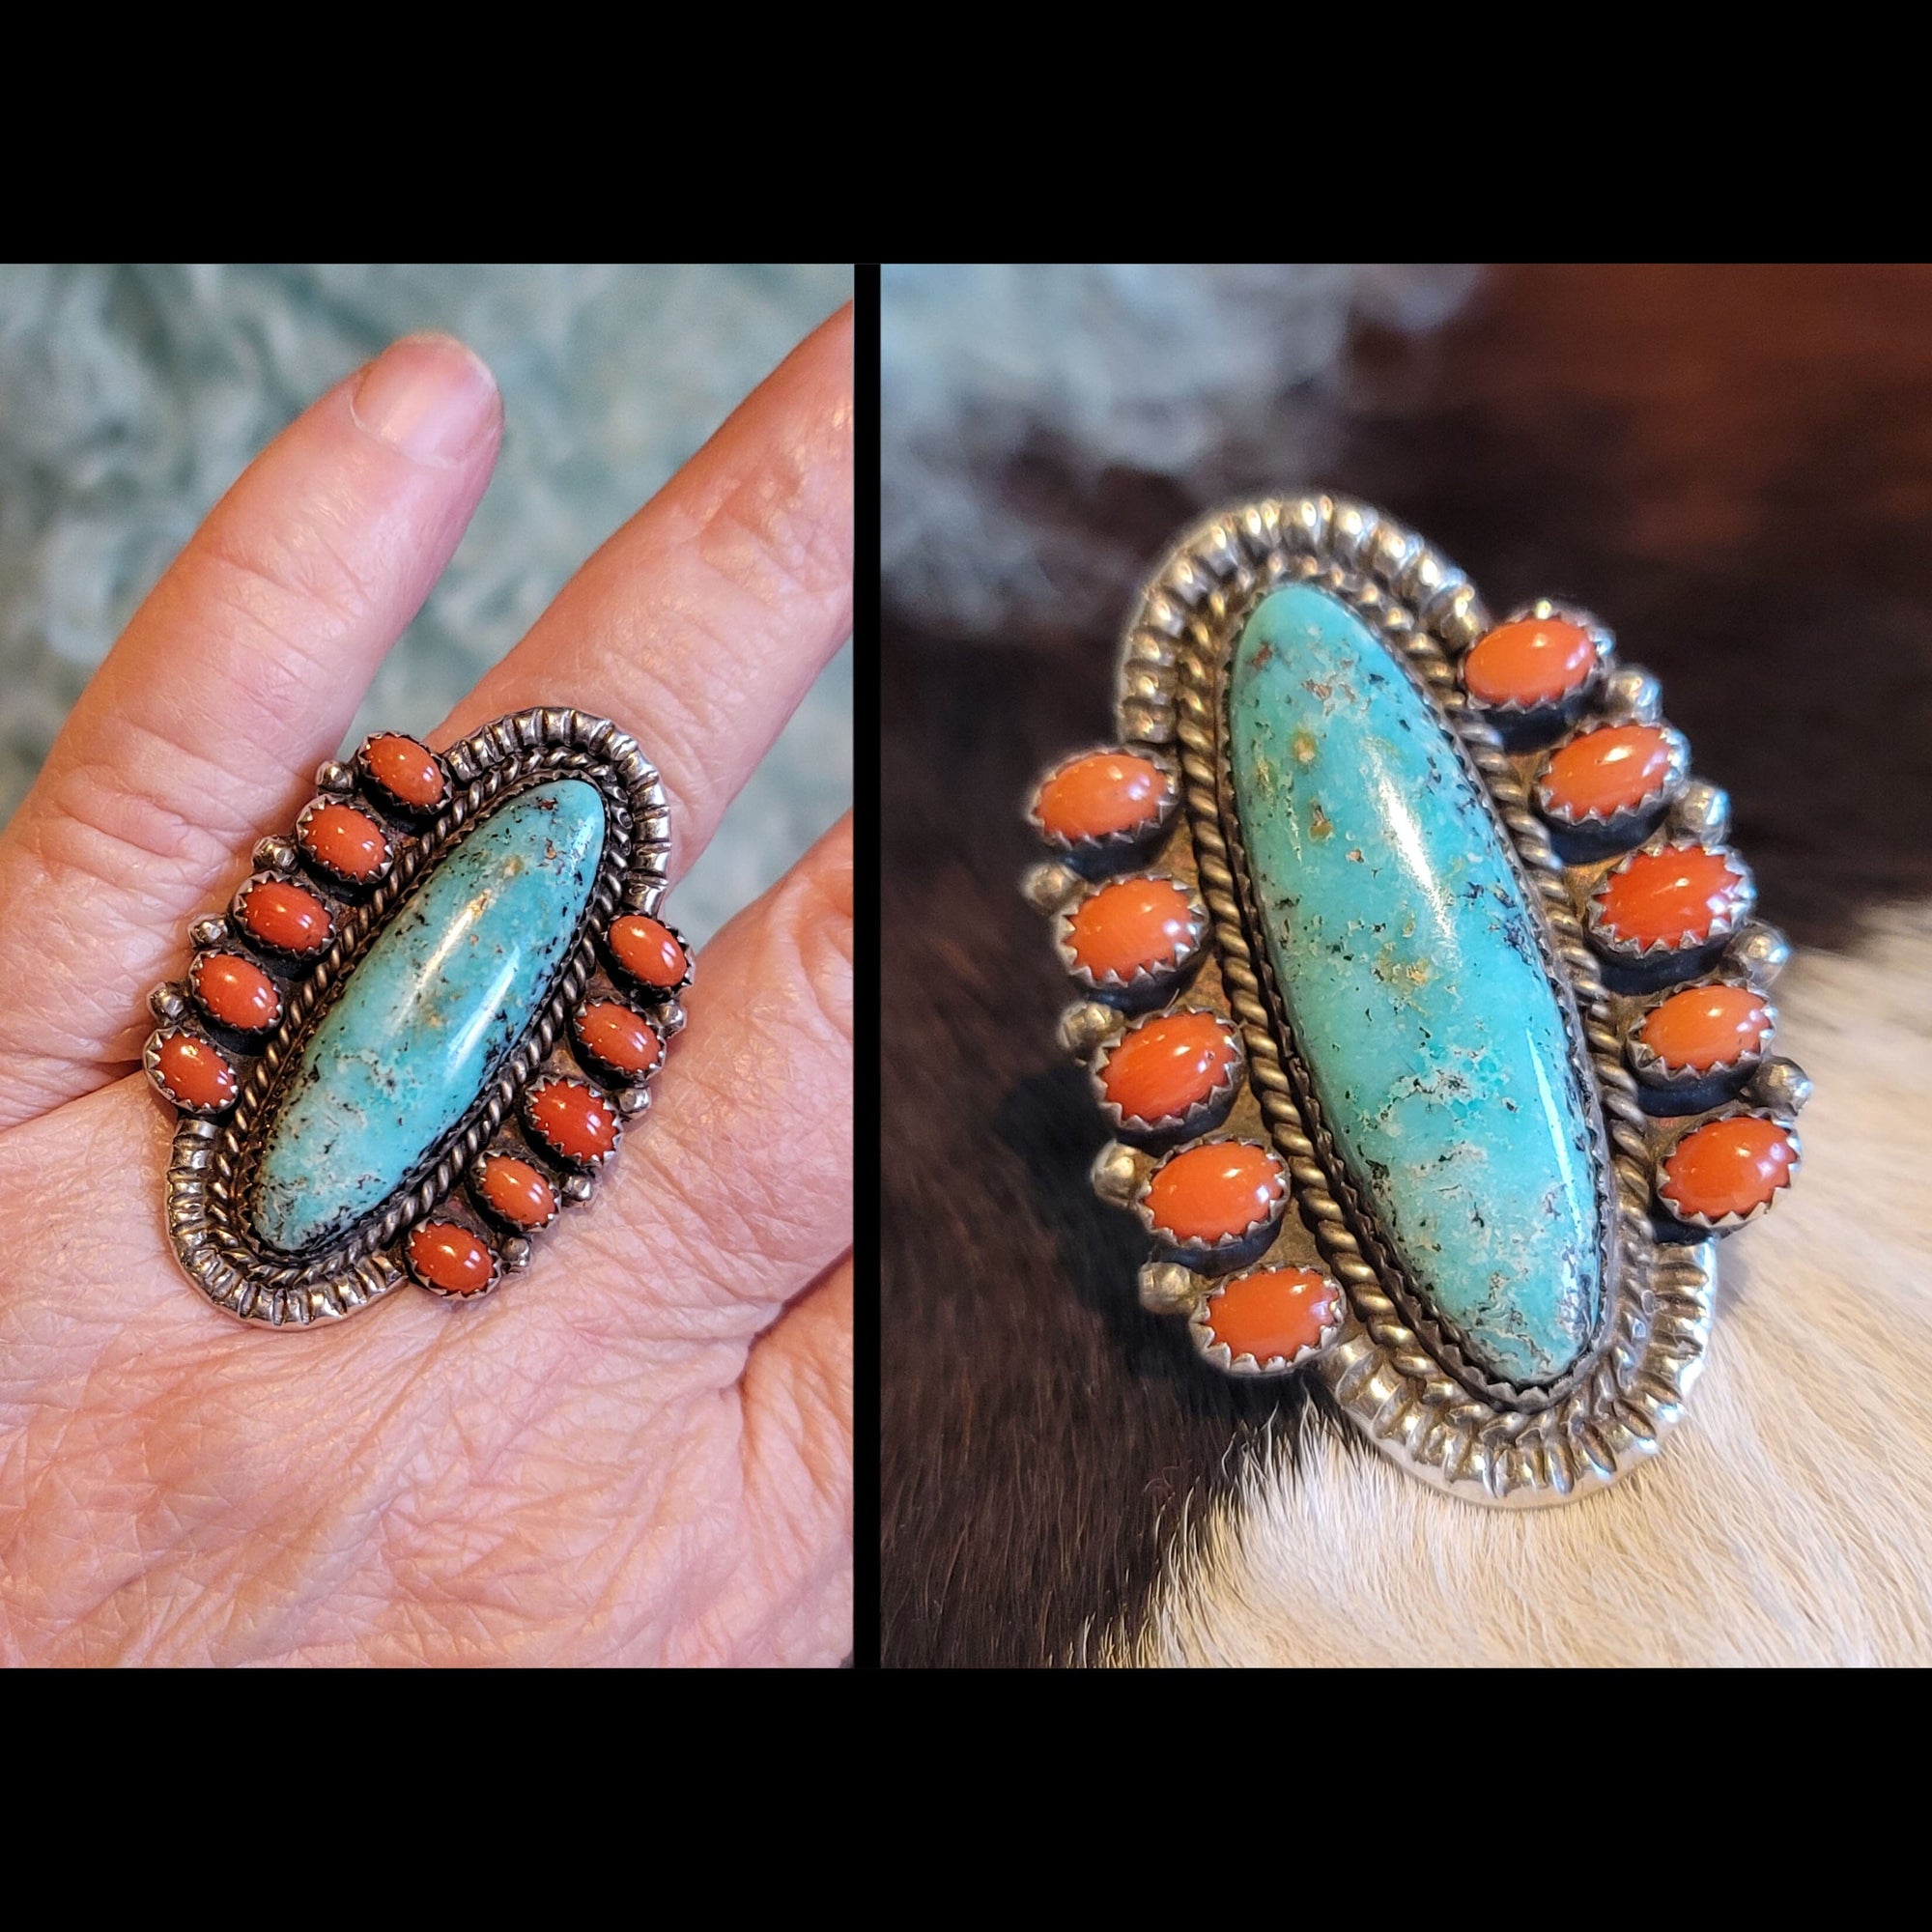 Turquoise / Coral Ring - Size 8.5 - RMH94